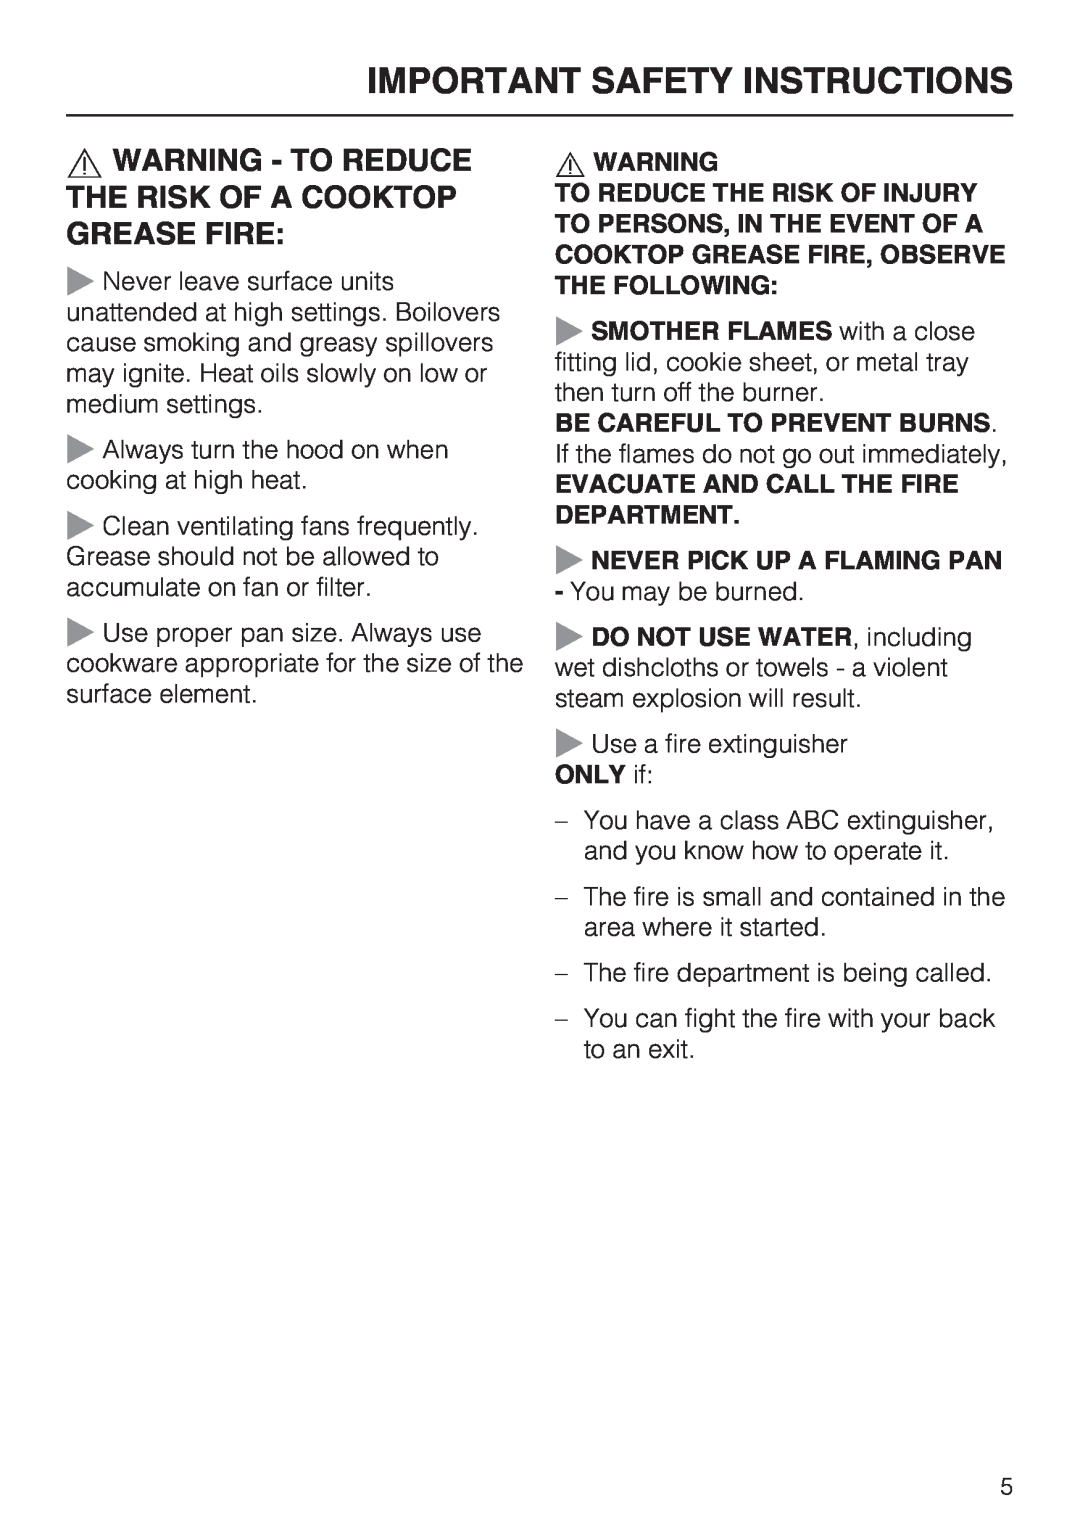 Miele DA5341D installation instructions Important Safety Instructions, Evacuate And Call The Fire Department 